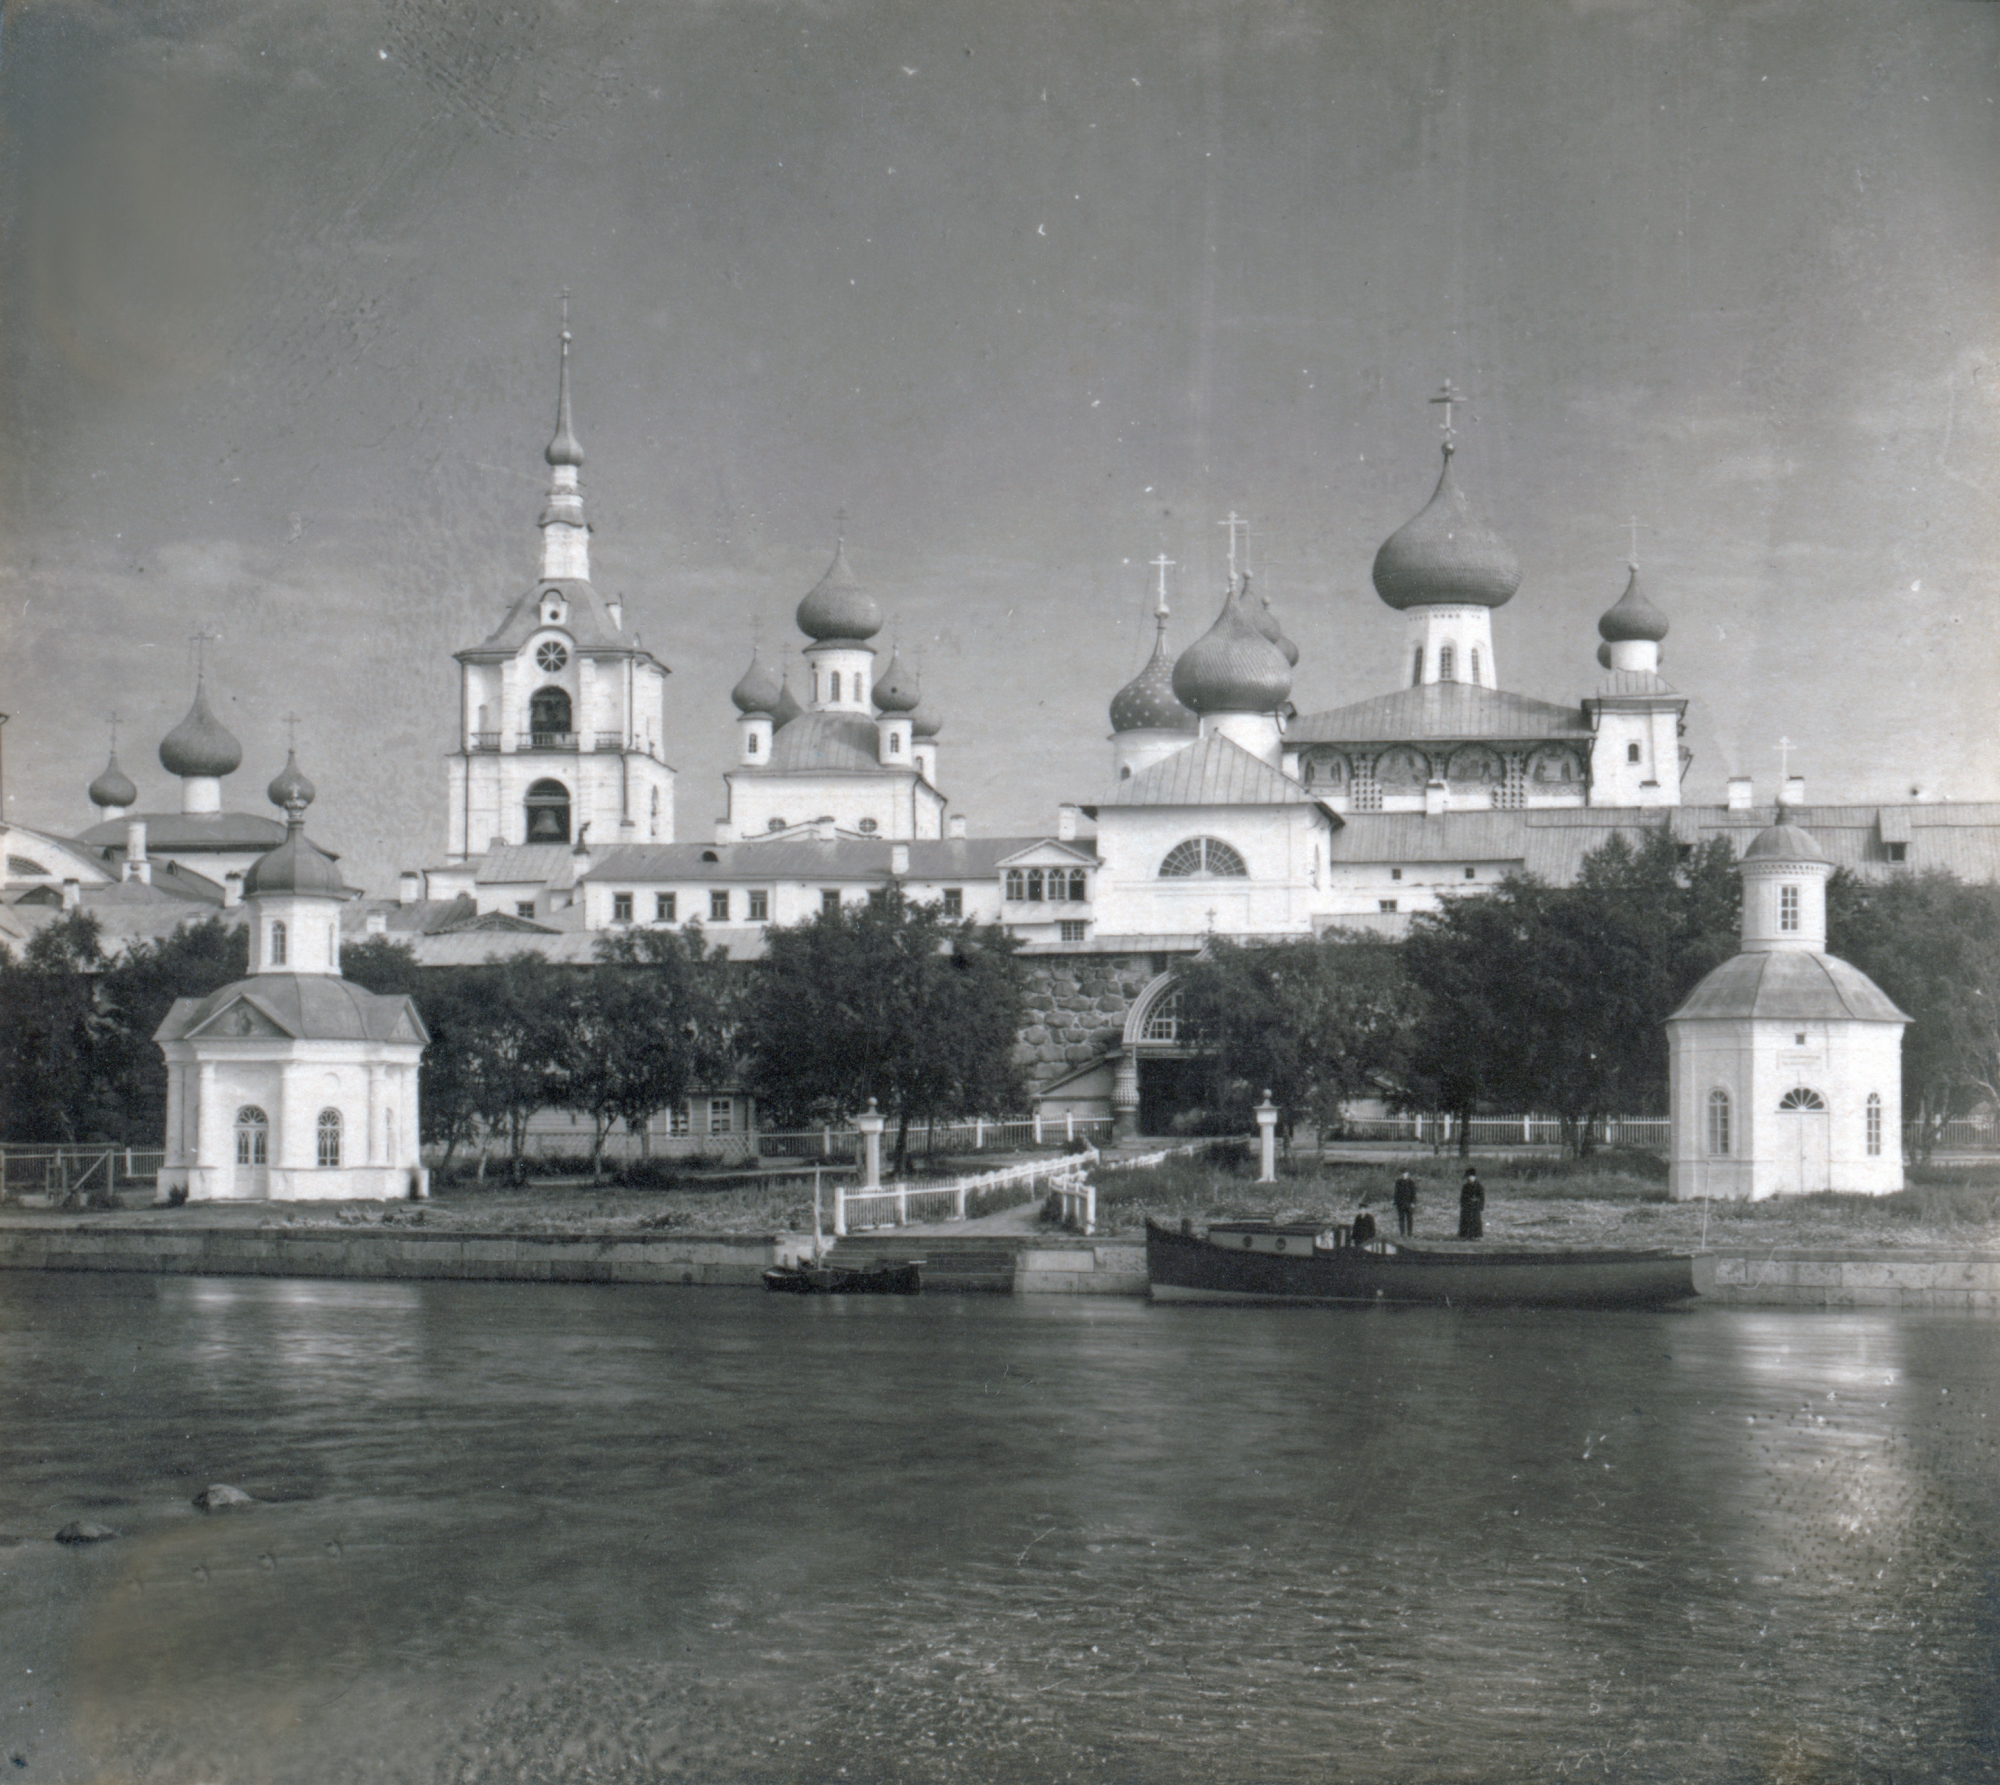 Solovetsky Transfiguration Monastery, west view. From left: Refectory Church of Dormition; Chapel of St. Alexander Nevsky; bell tower; Church of St. Nicholas; Church of Annunciation; west wall & Holy Gate; Transfiguration Cathedral; Chapel of Sts. Peter & Paul. Summer 1916. / Photo: Sergei Prokudin-Gorsky 